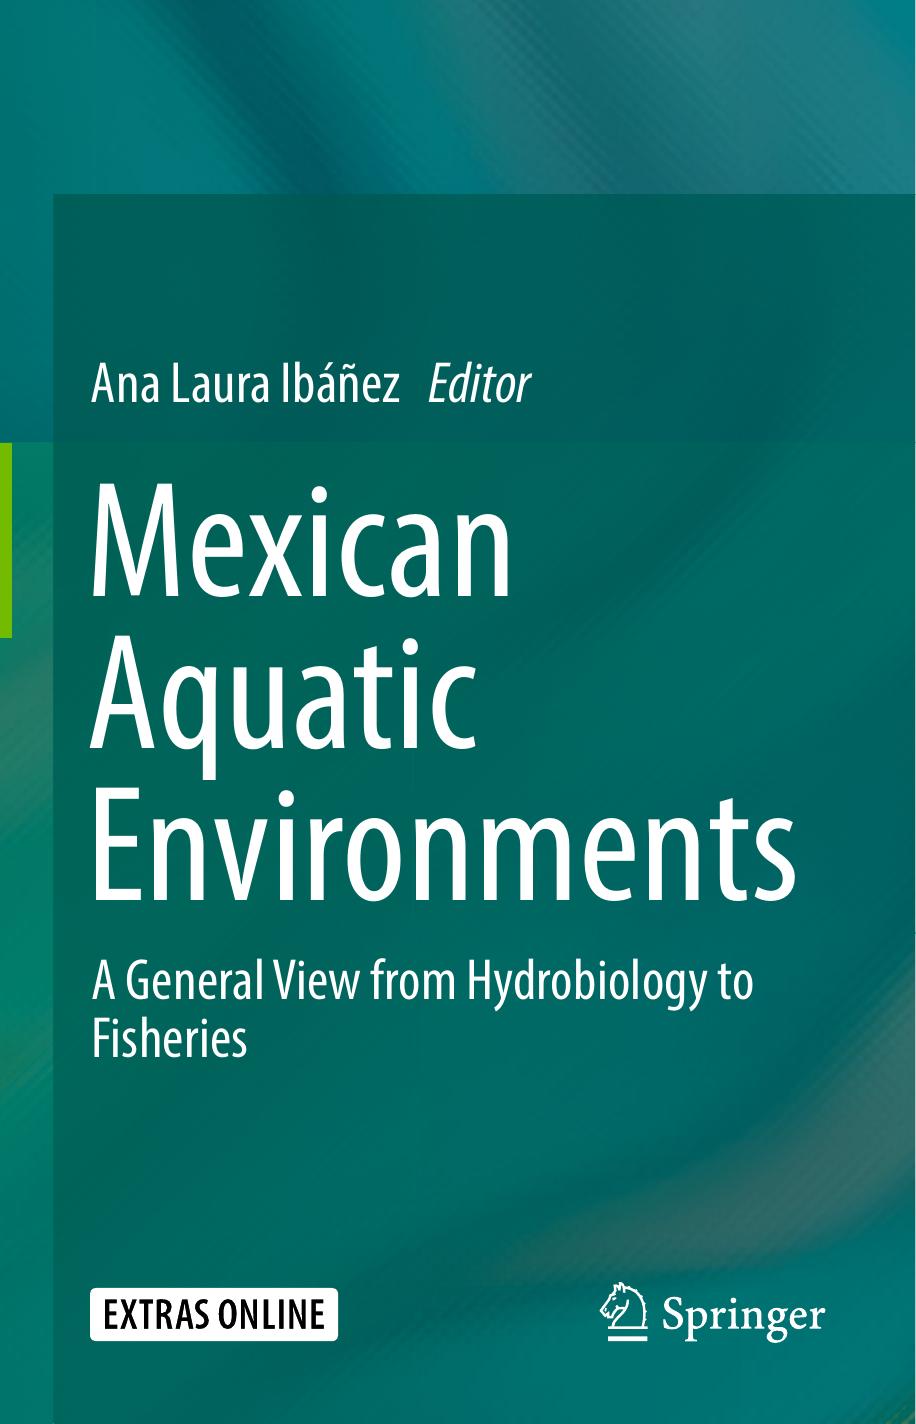 Mexican Aquatic Environments  A General View from Hydrobiology to Fisheries-Springer International Publishing (2019)